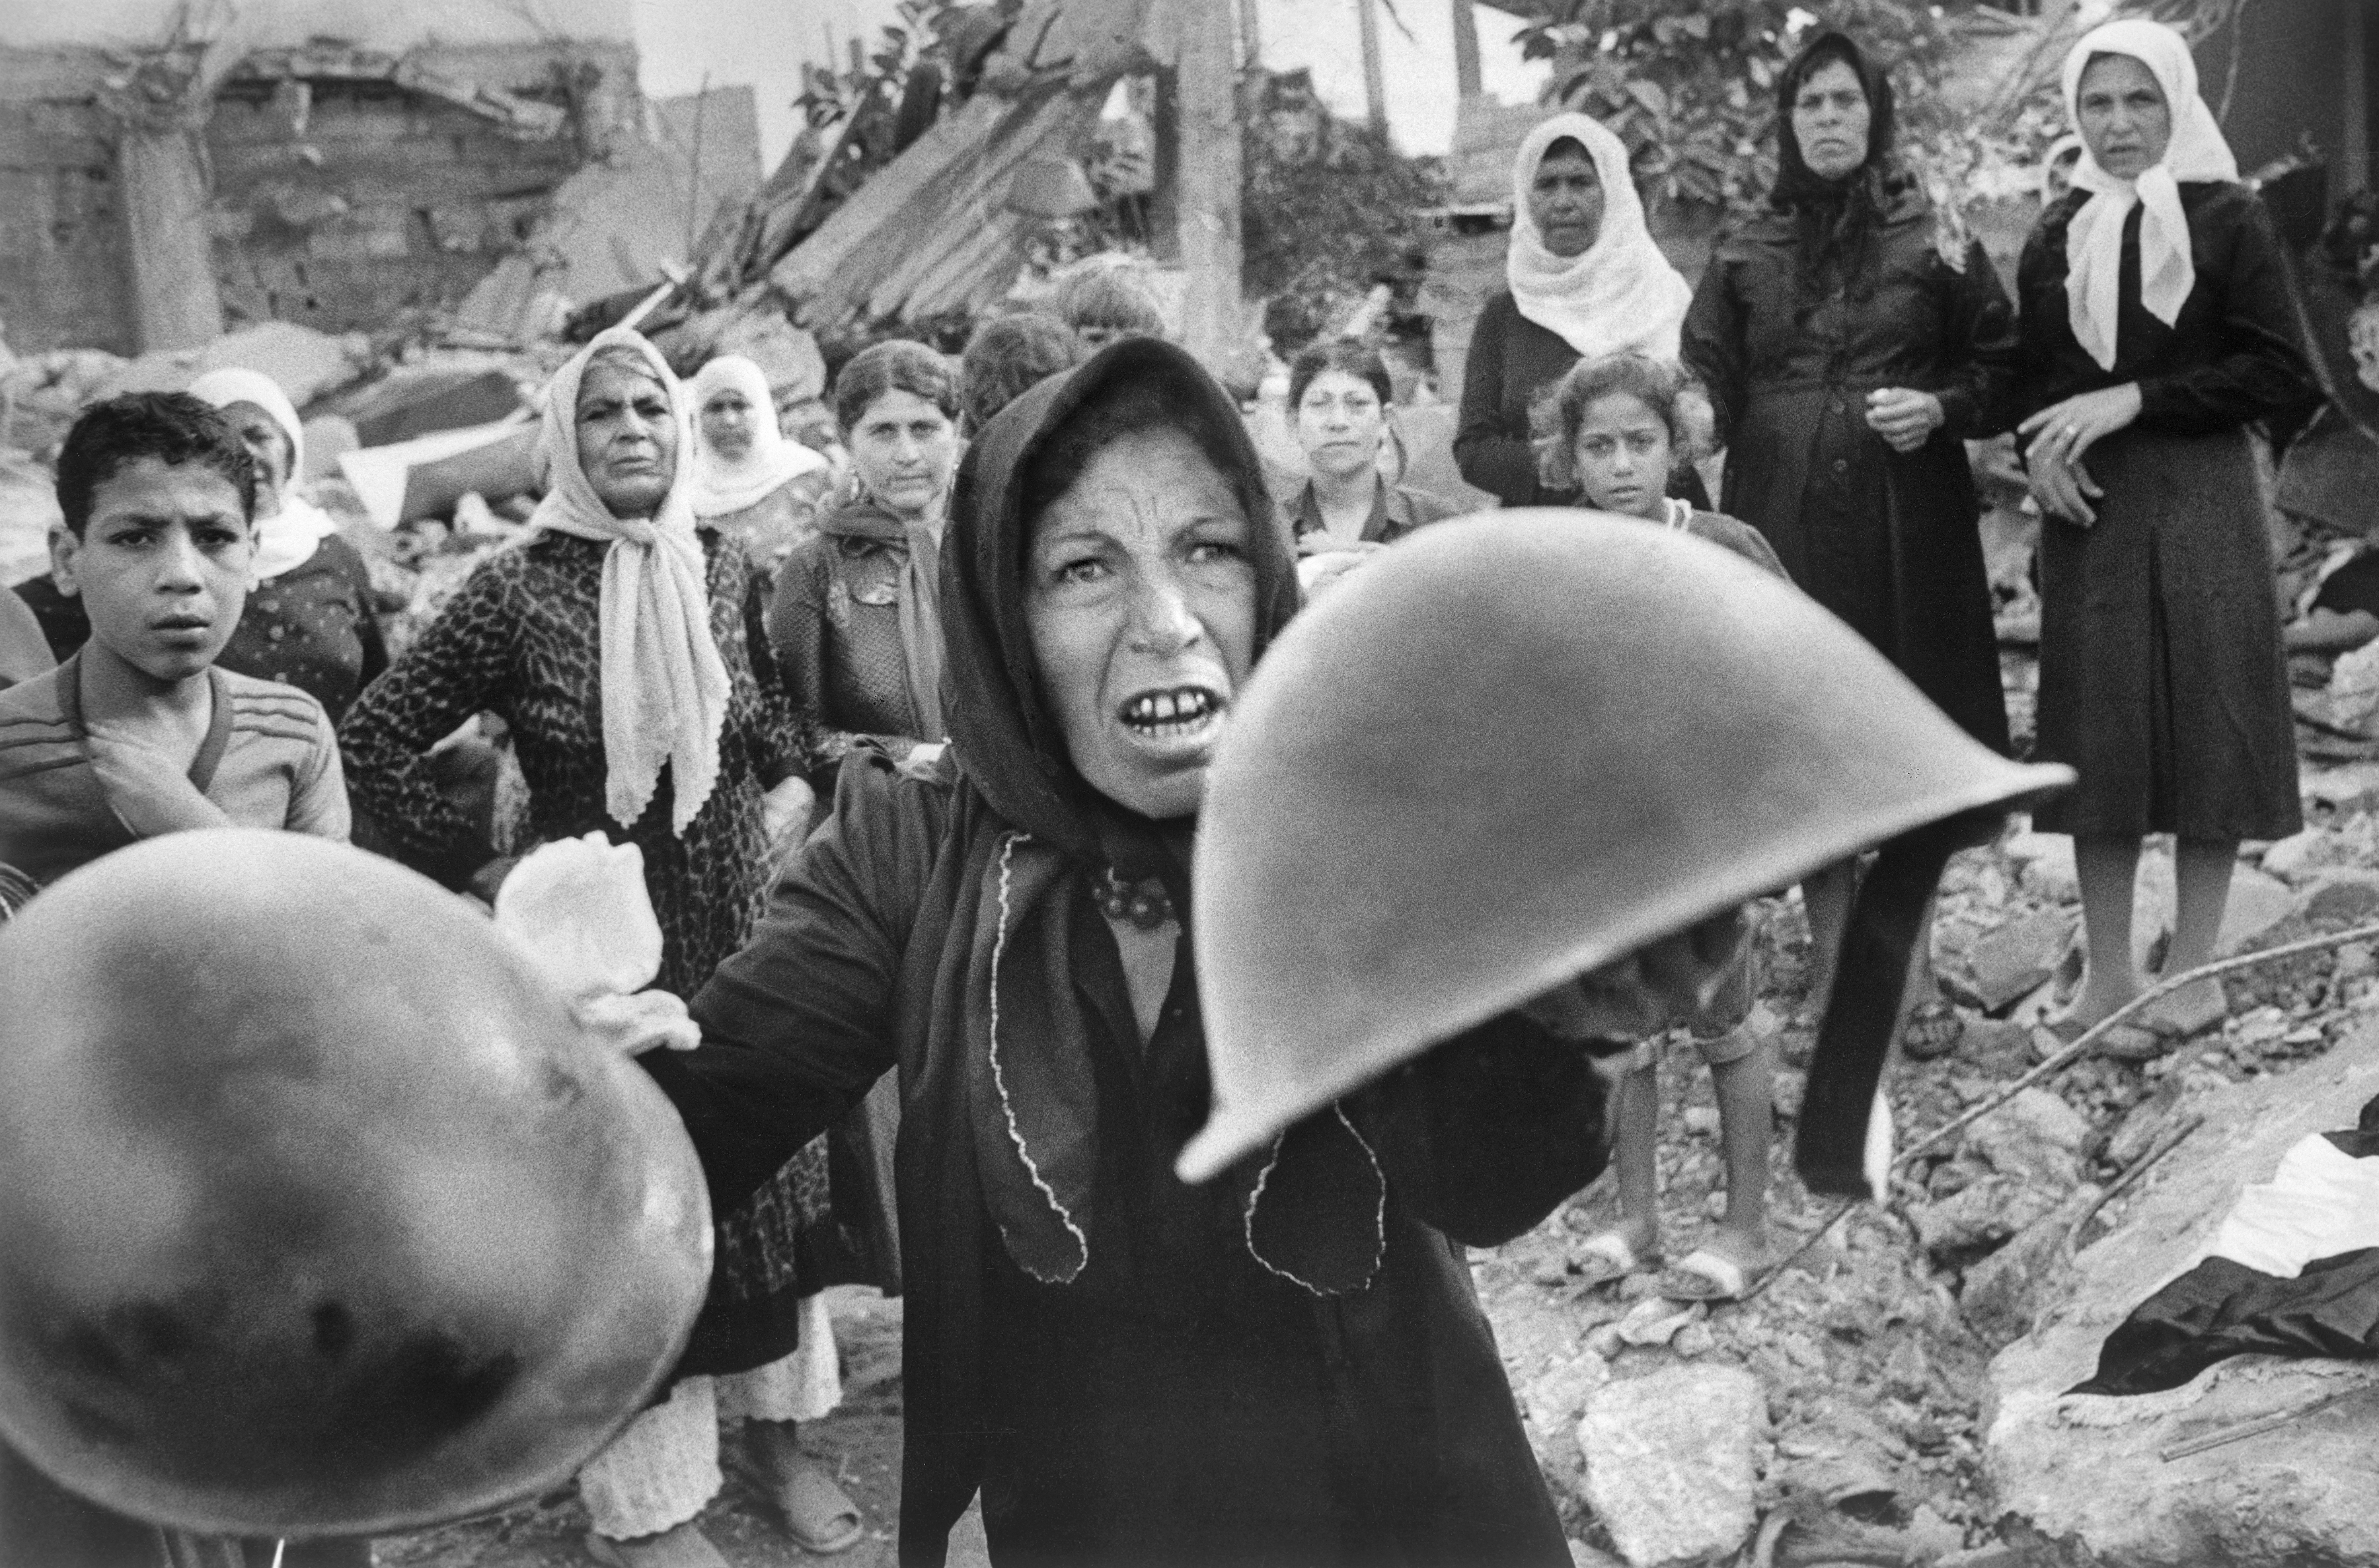 A Palestinian woman brandishes helmets during a memorial service in Beirut September 27, 1982, for victims of Lebanon's Sabra refugee camp massacre. She claimed the helmets ere worn by those who massacred hundreds of her countrymen. (AP Photo/Bill Foley)